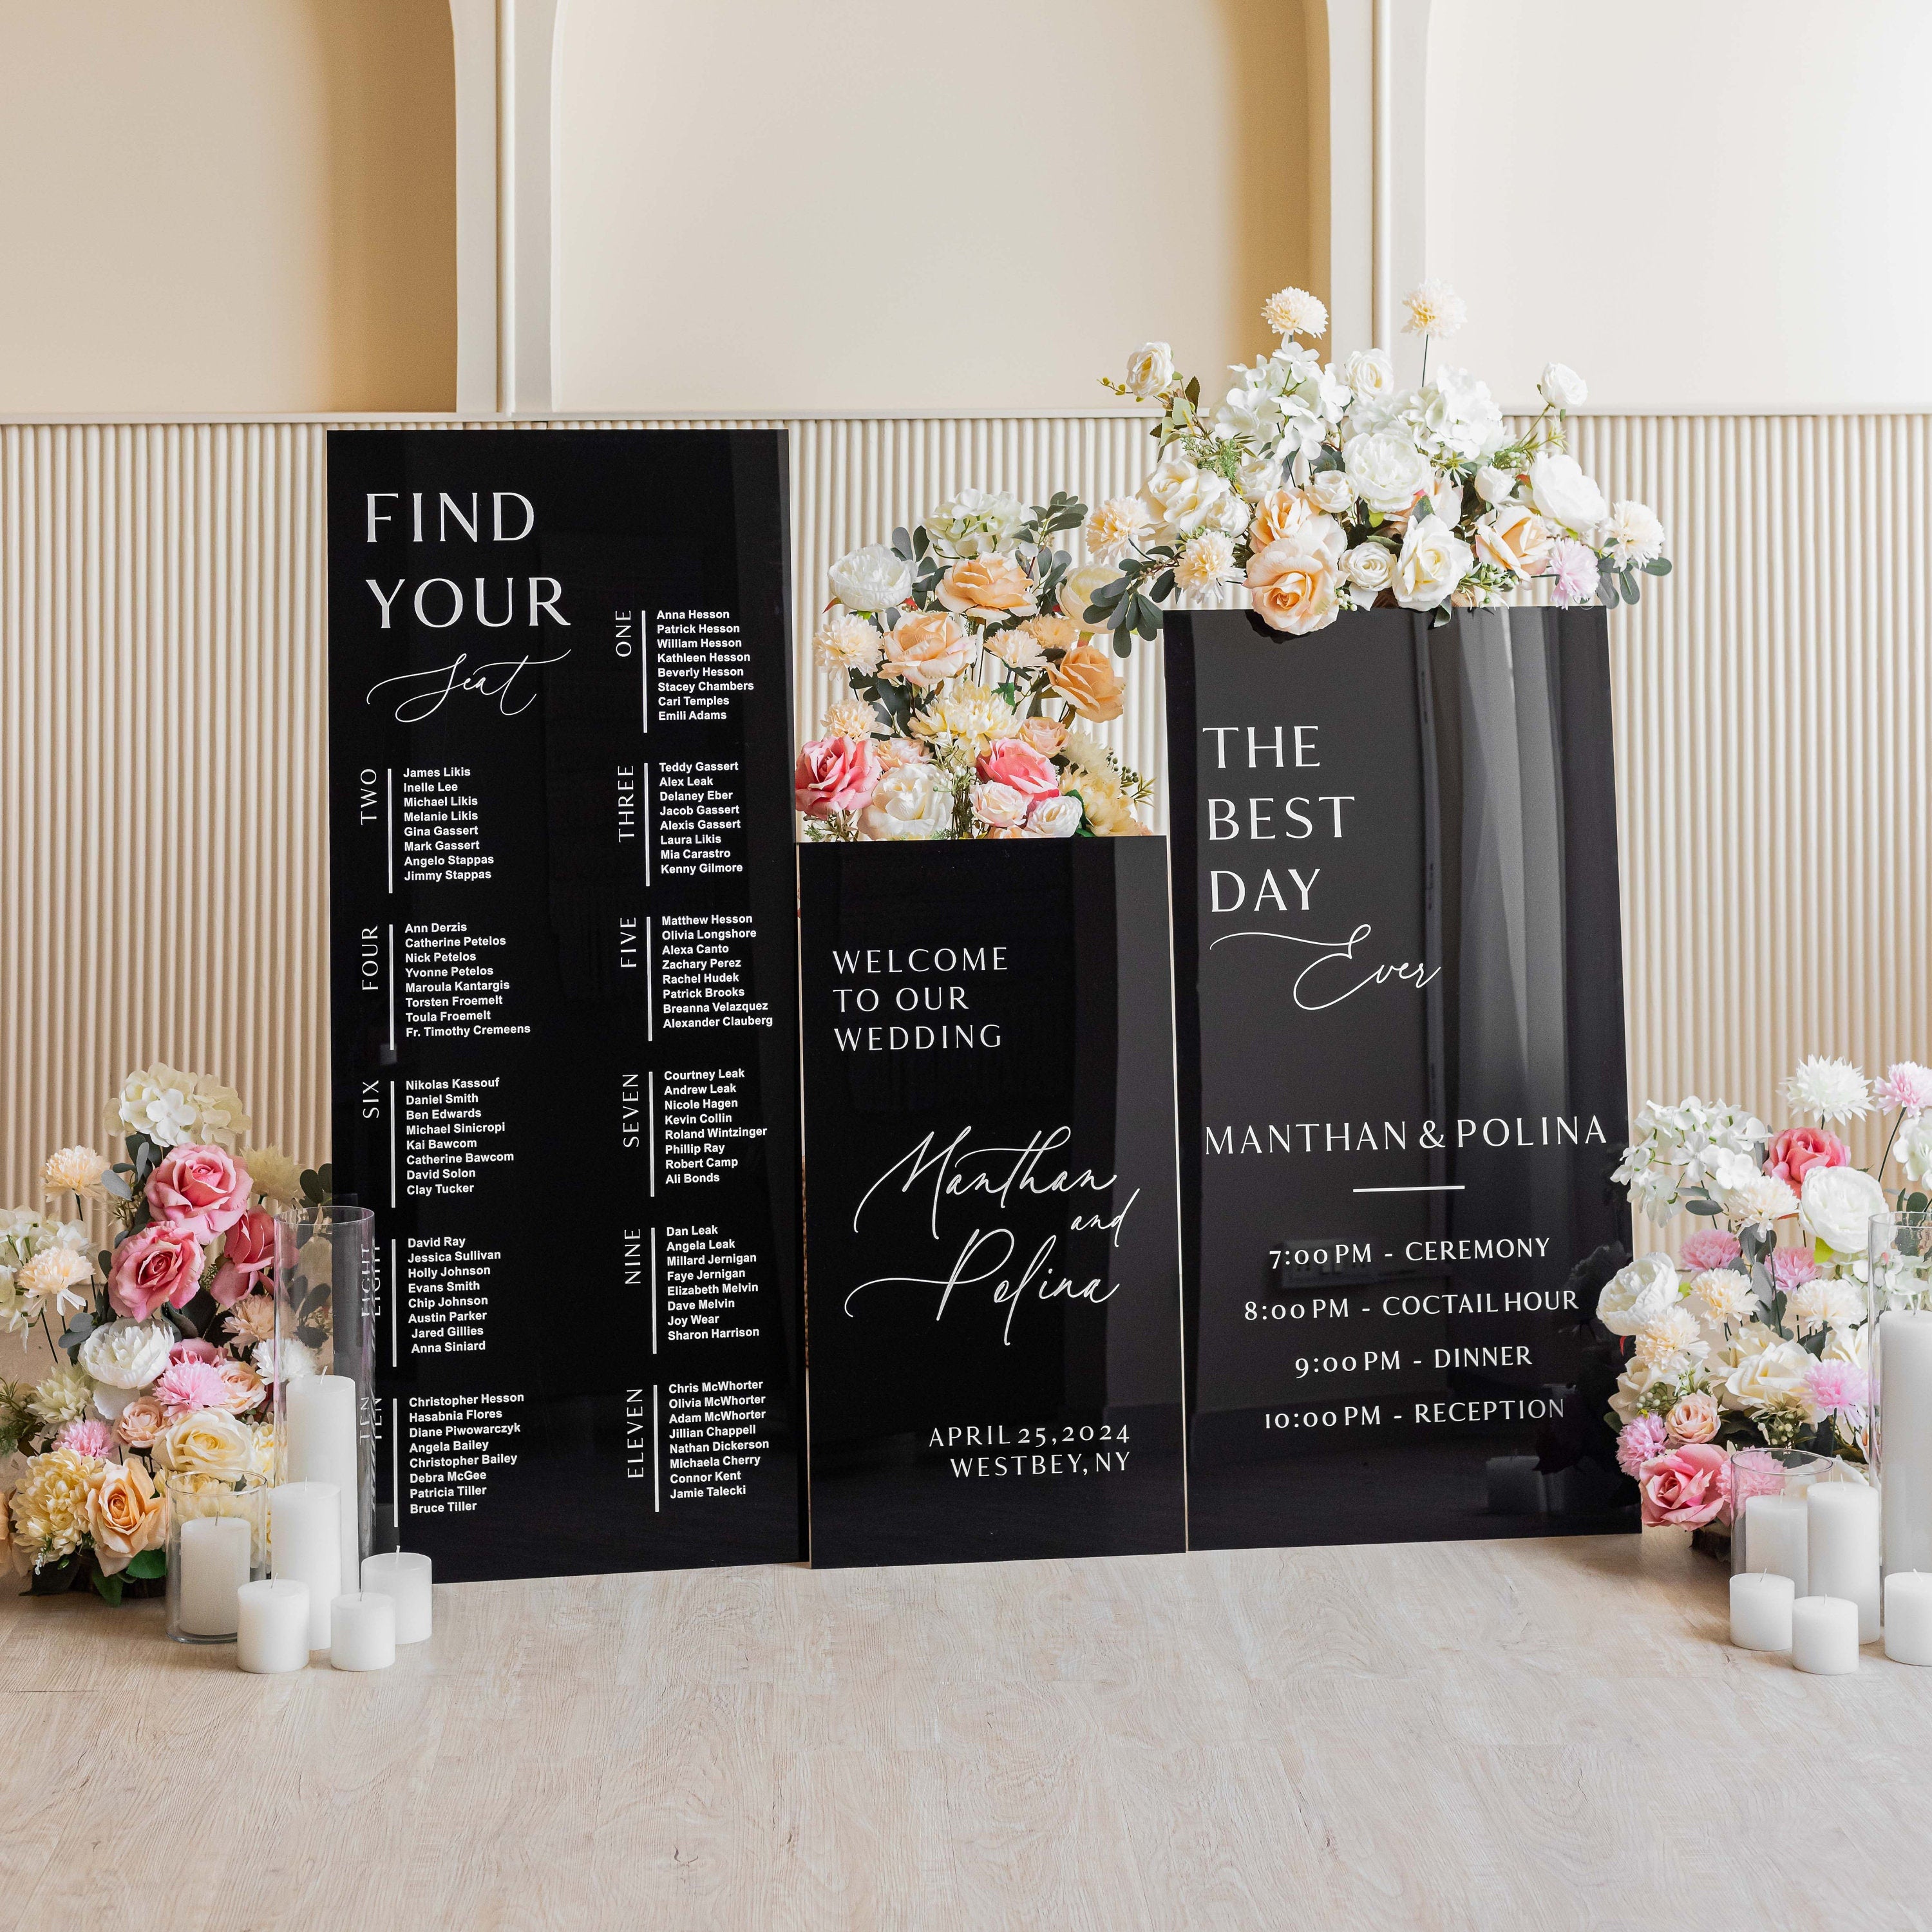 Wedding Signs Bundle - Black Seating Chart  - Set of Three - Acrylic Wedding Sign - Wedding Decor - Reception Welcome Sign - Welcome Signs